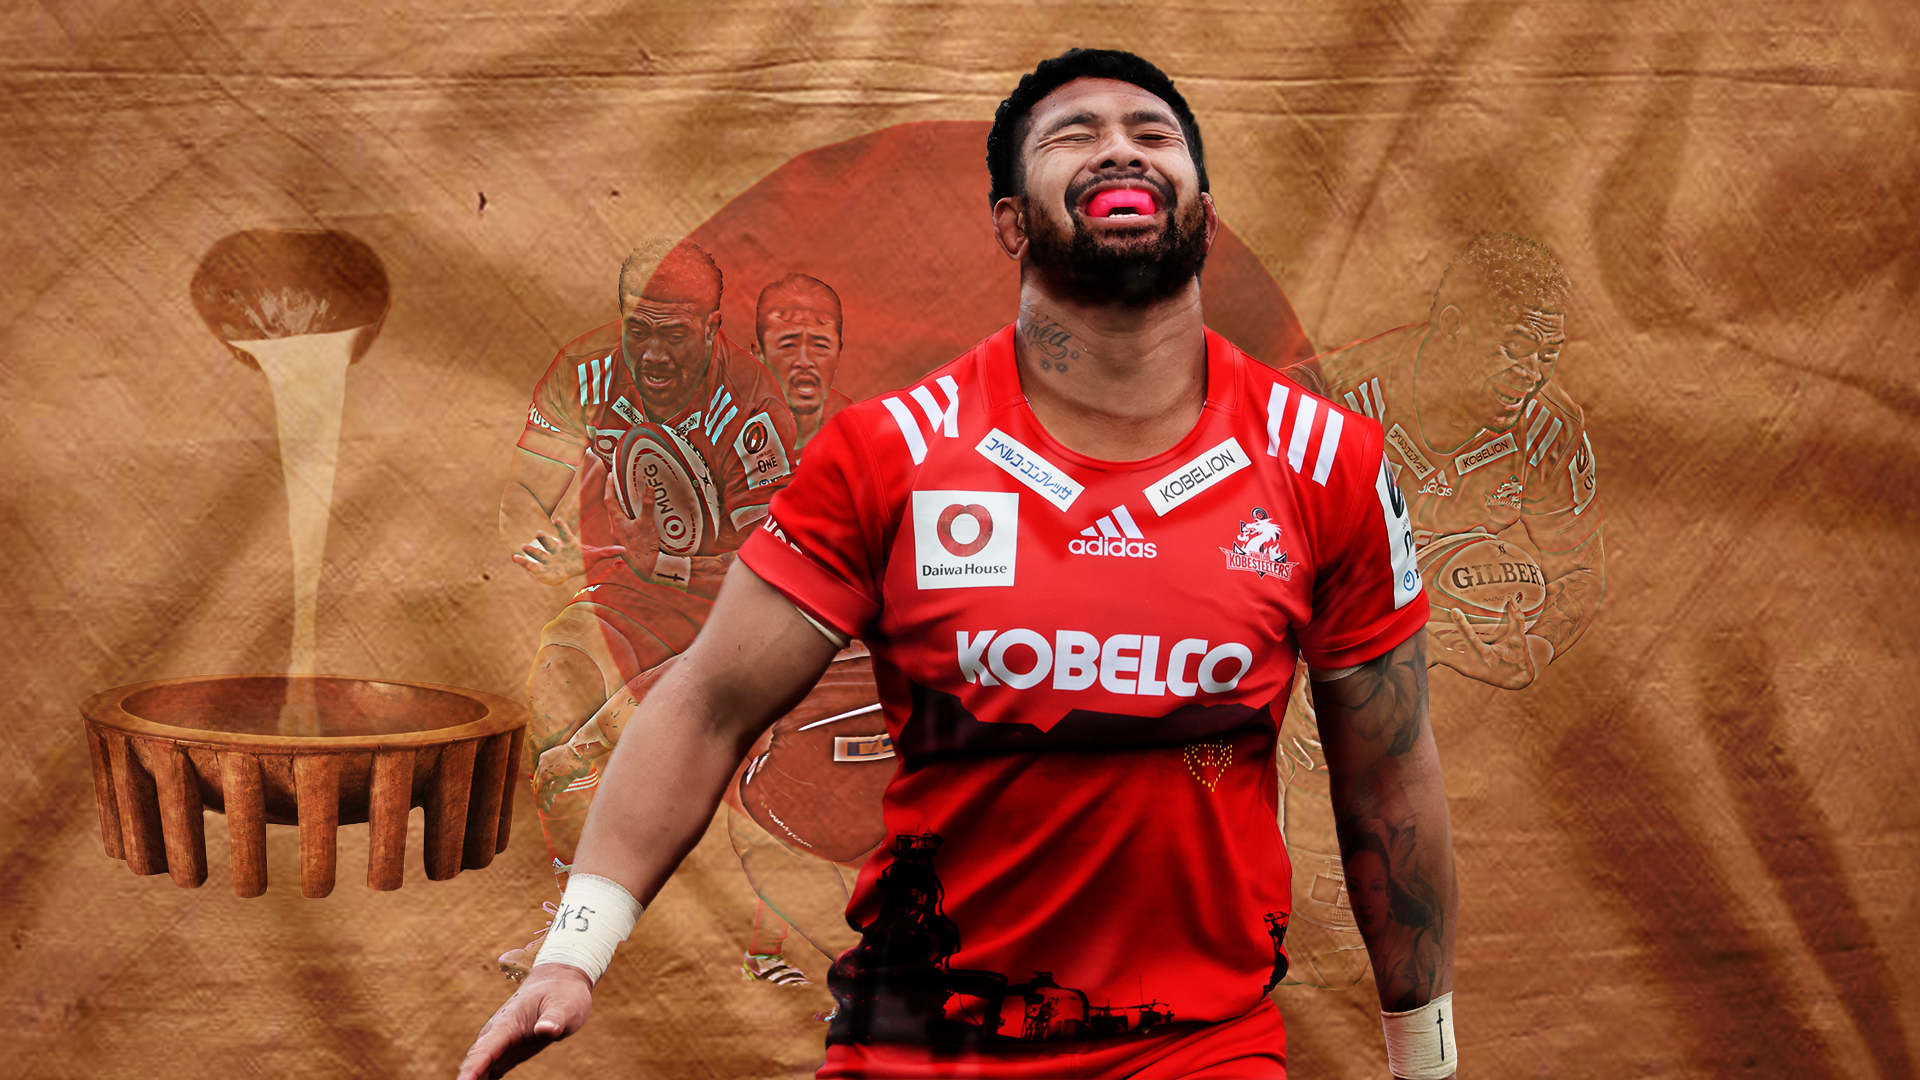 Kava sessions and culture connections for Ardie Savea in Japan